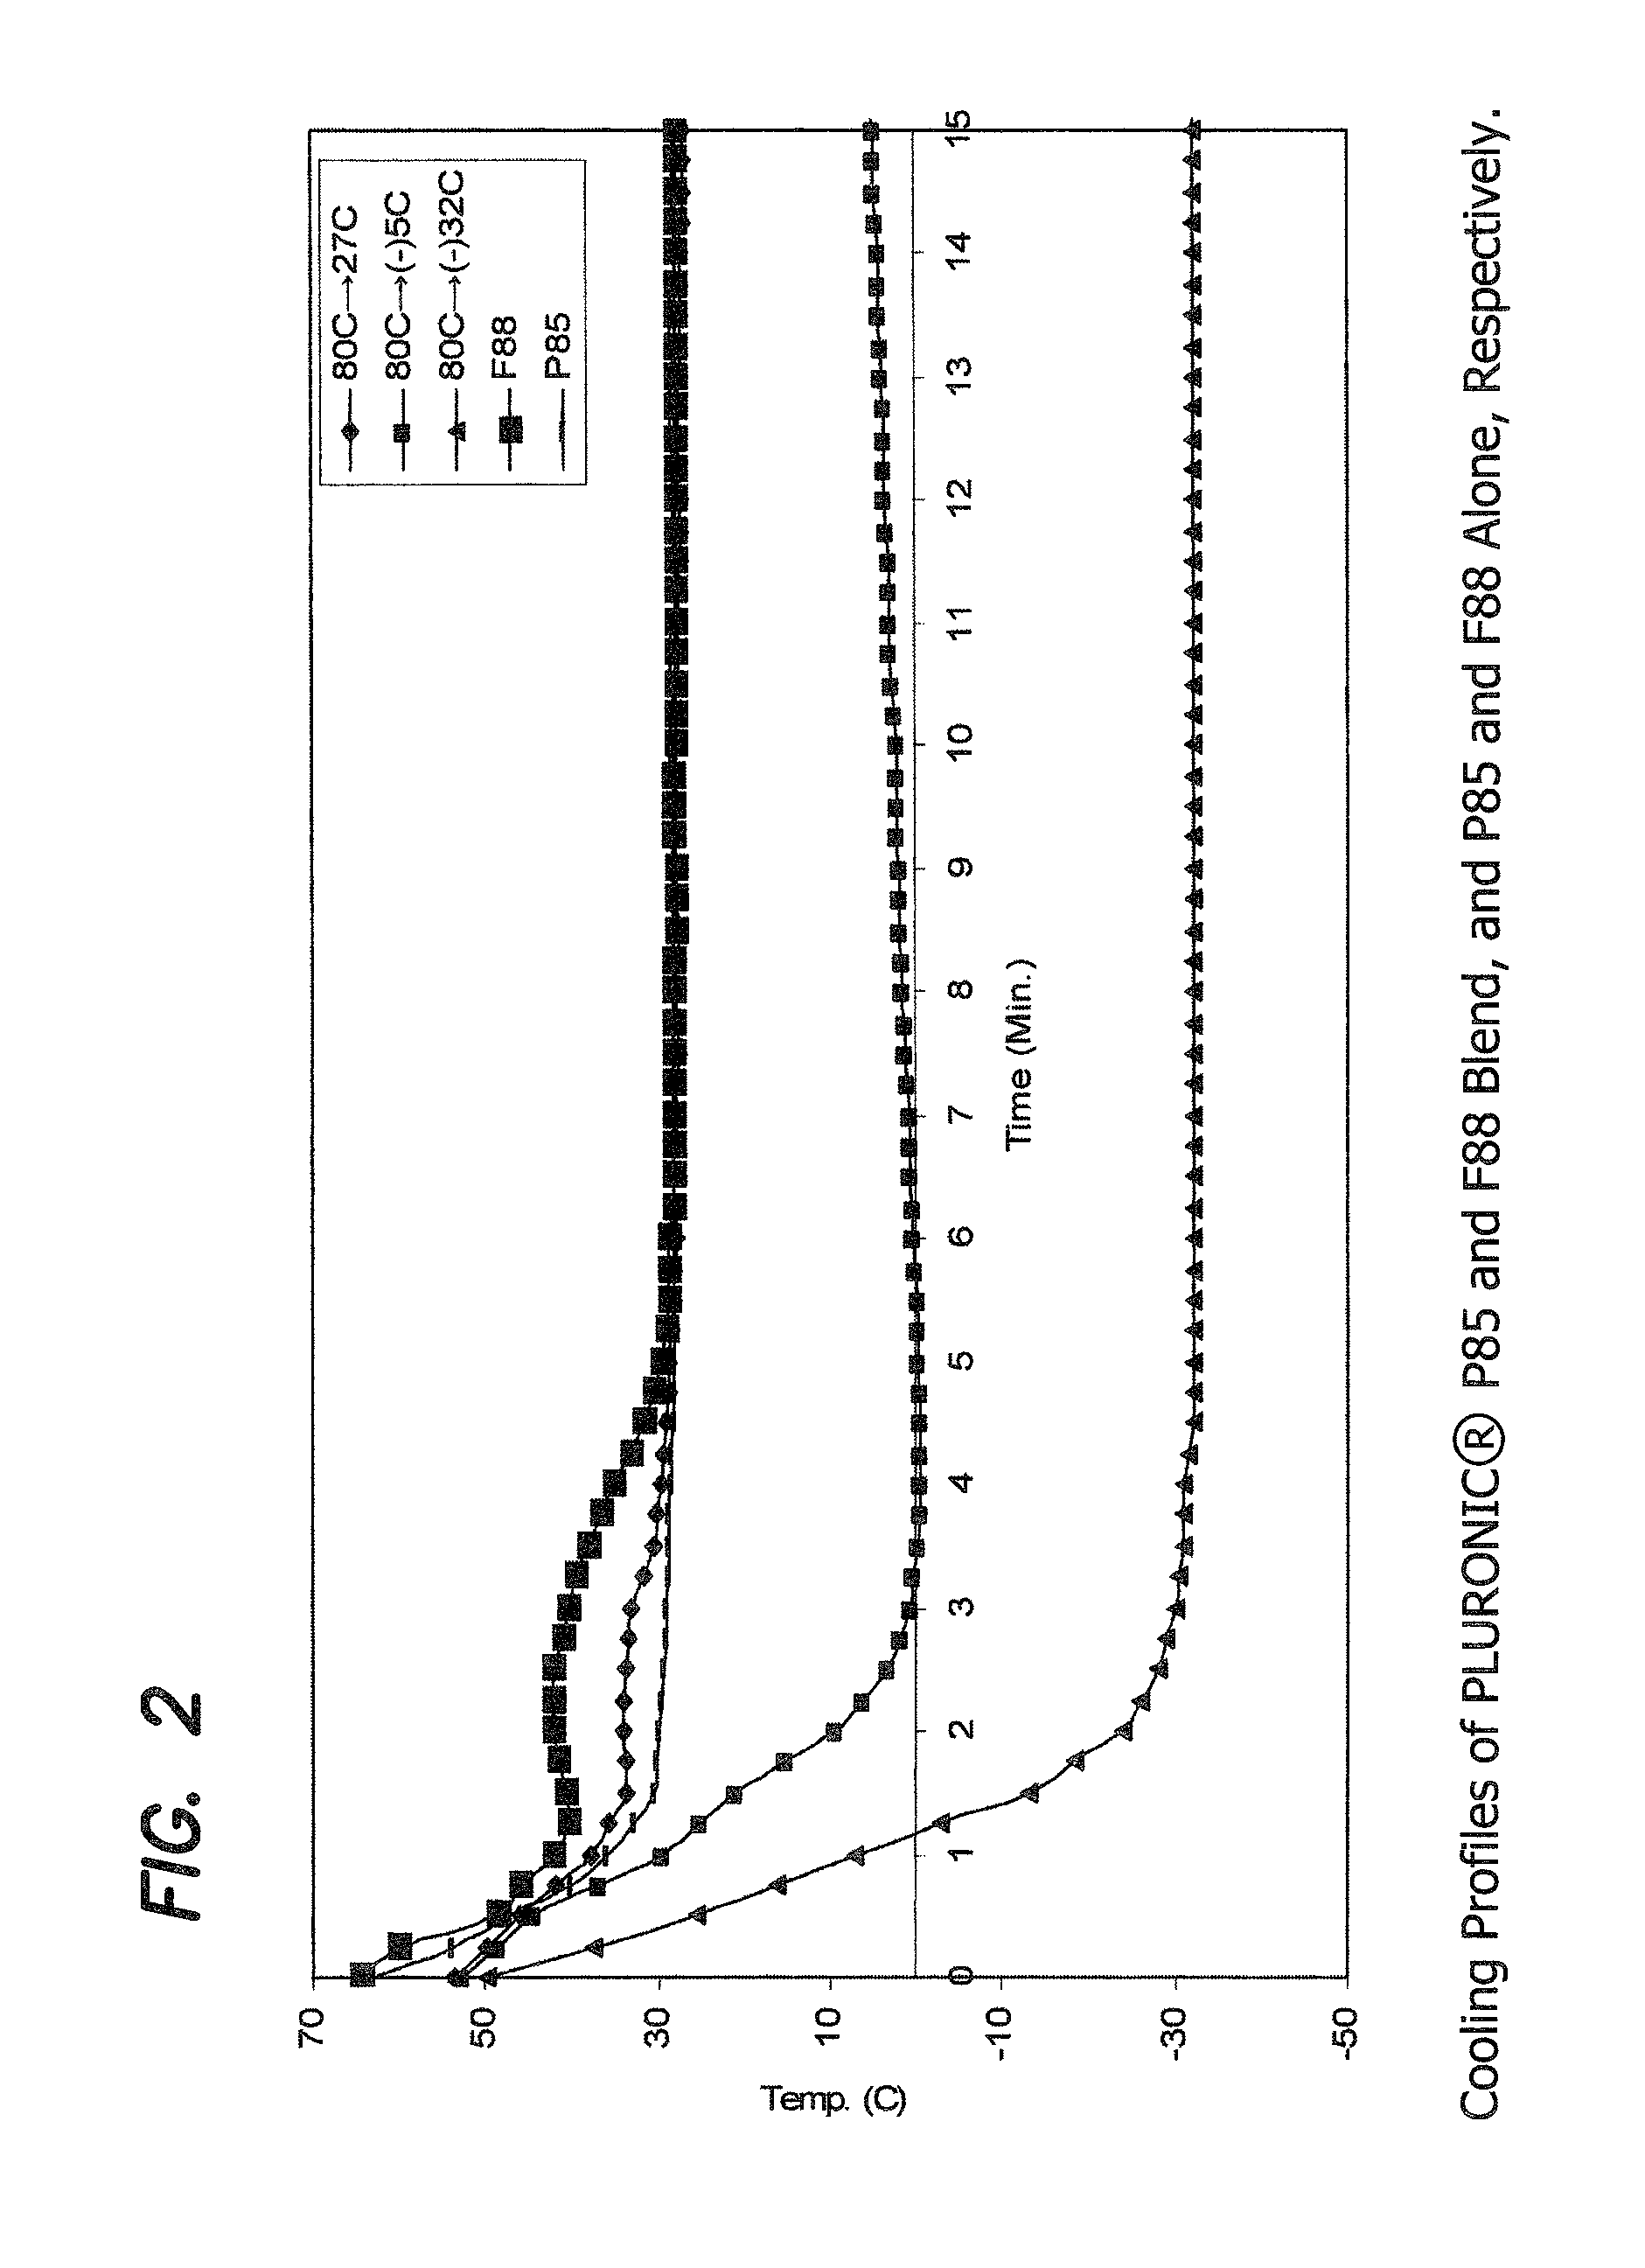 Biocompatible polymeric compositions having microcrystalline and amorphous components and methods for their manufacture